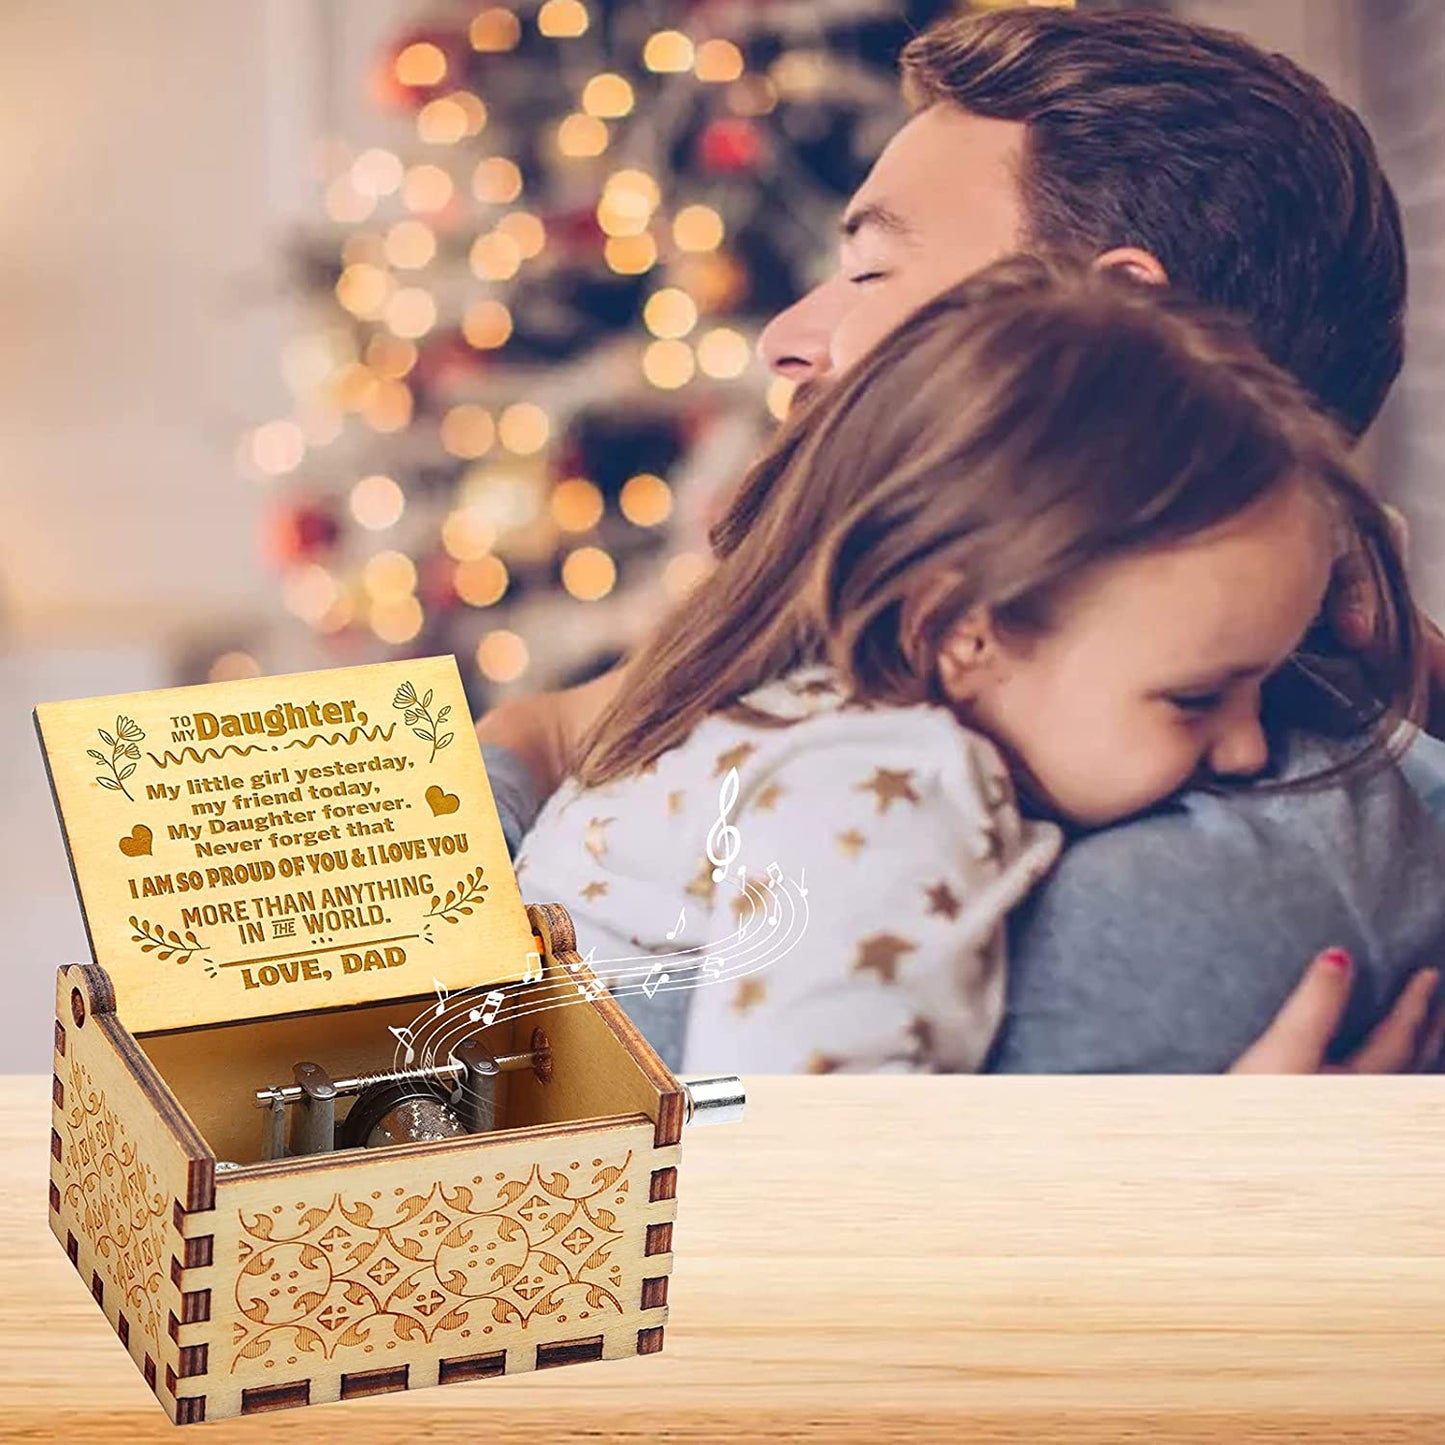 Wooden Music Box Gift - Plays "You Are My Sunshine" (Multiple Variations)